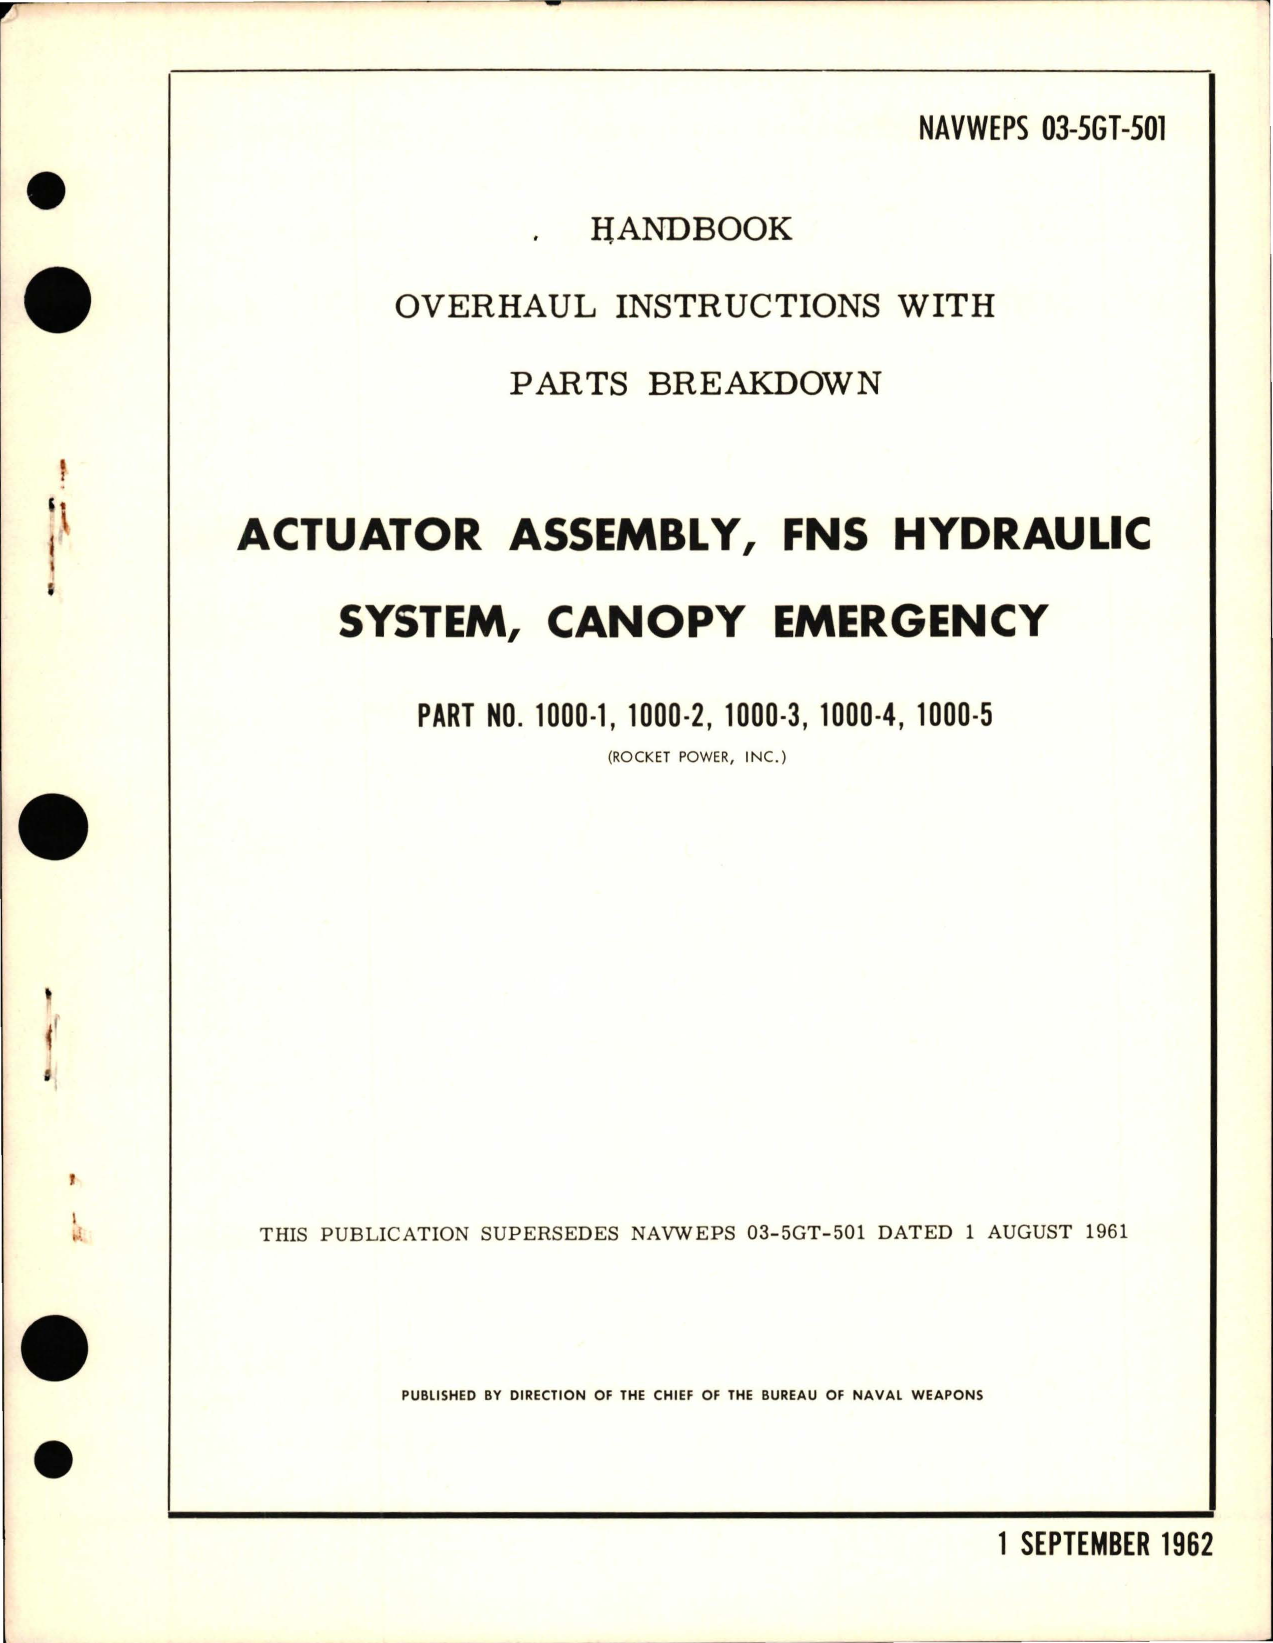 Sample page 1 from AirCorps Library document: Overhaul Instructions with Parts Breakdown for Canopy Emergency Actuator Assembly, FNS Hydraulic System 